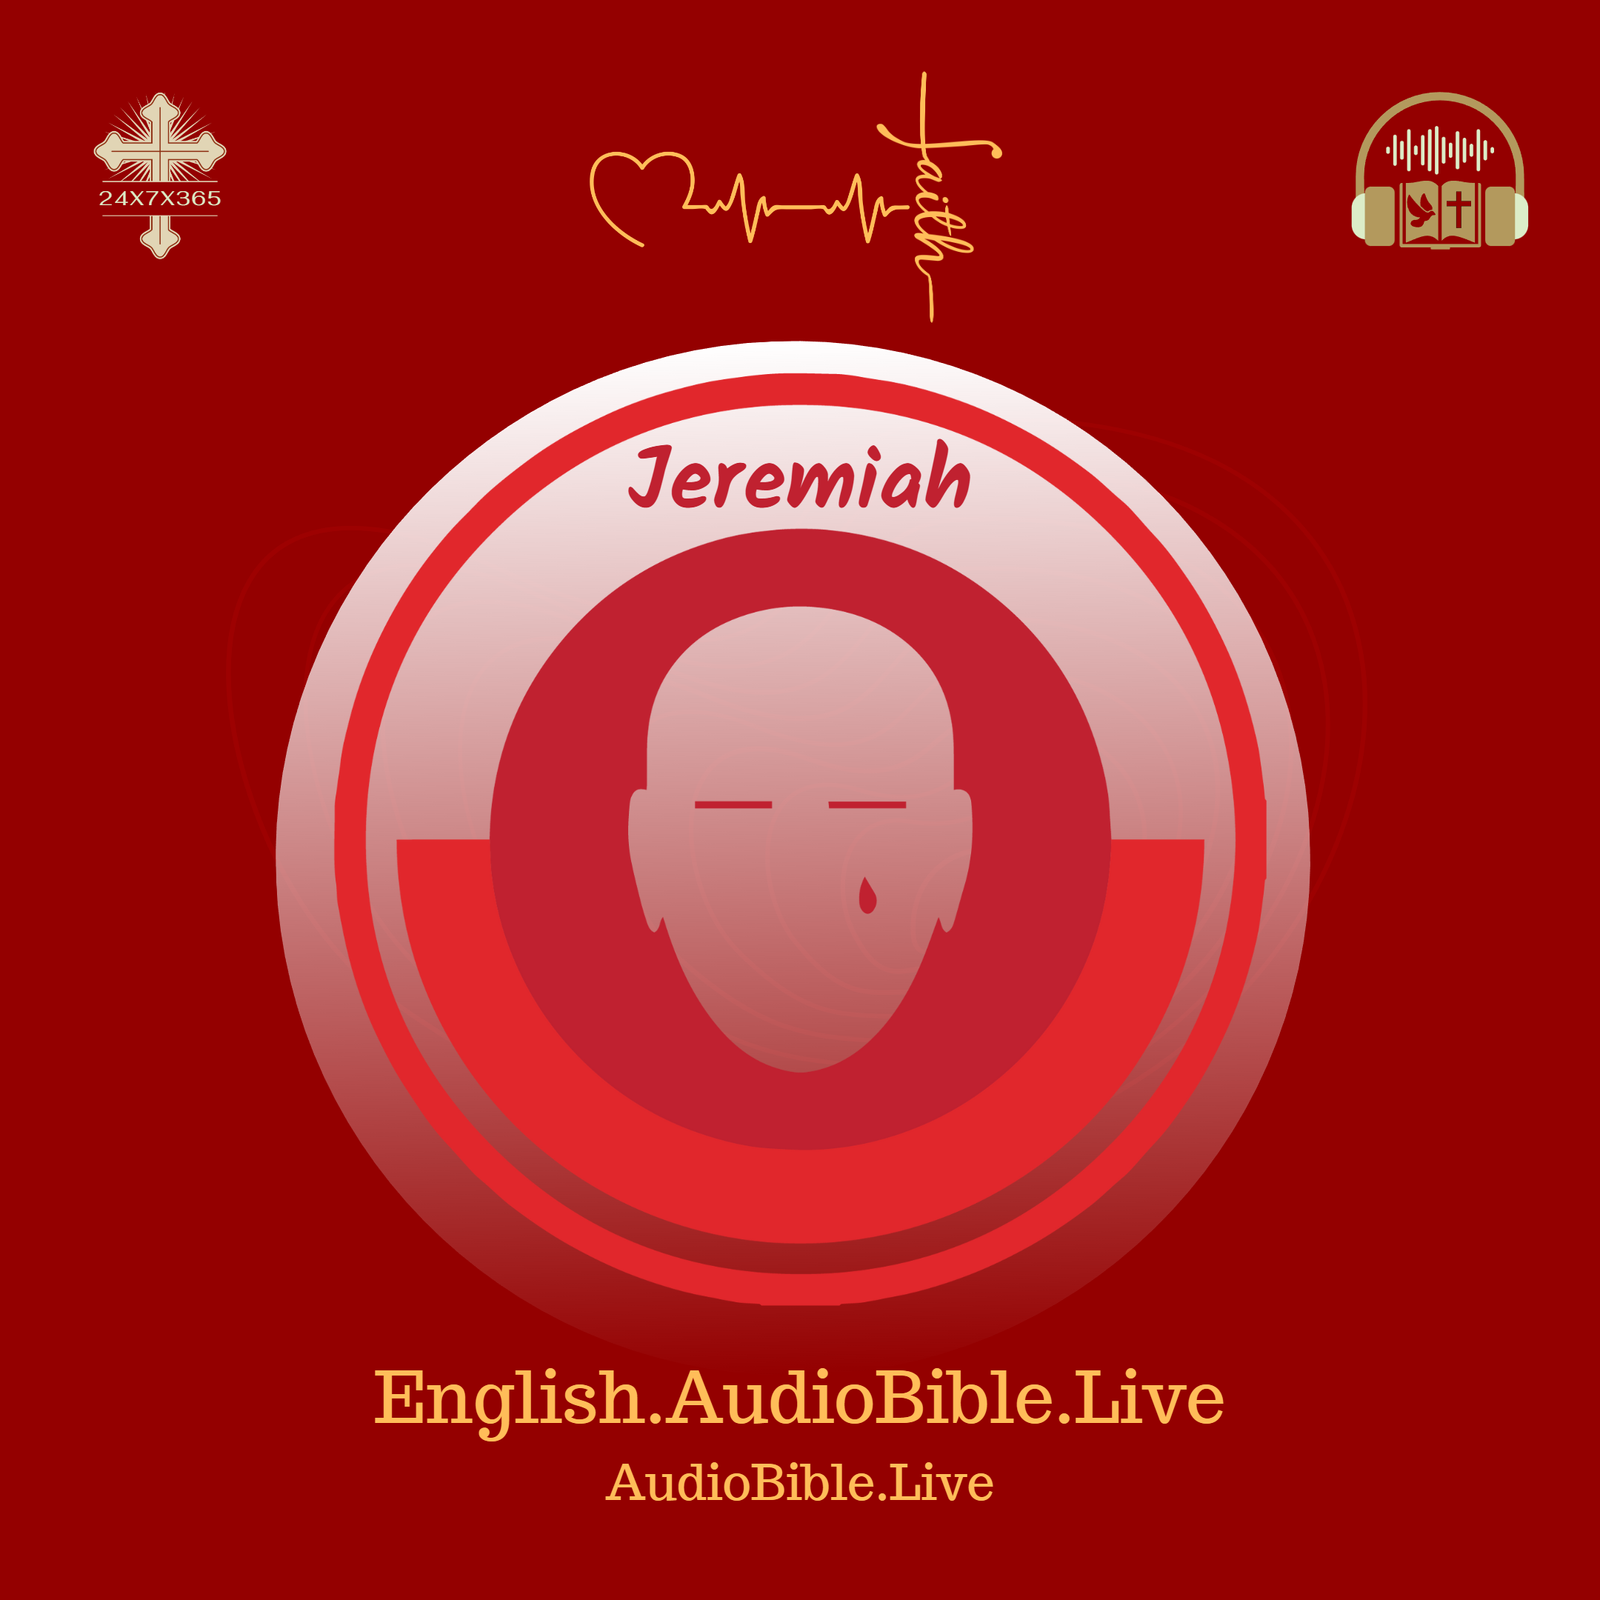 the book of jeremiah